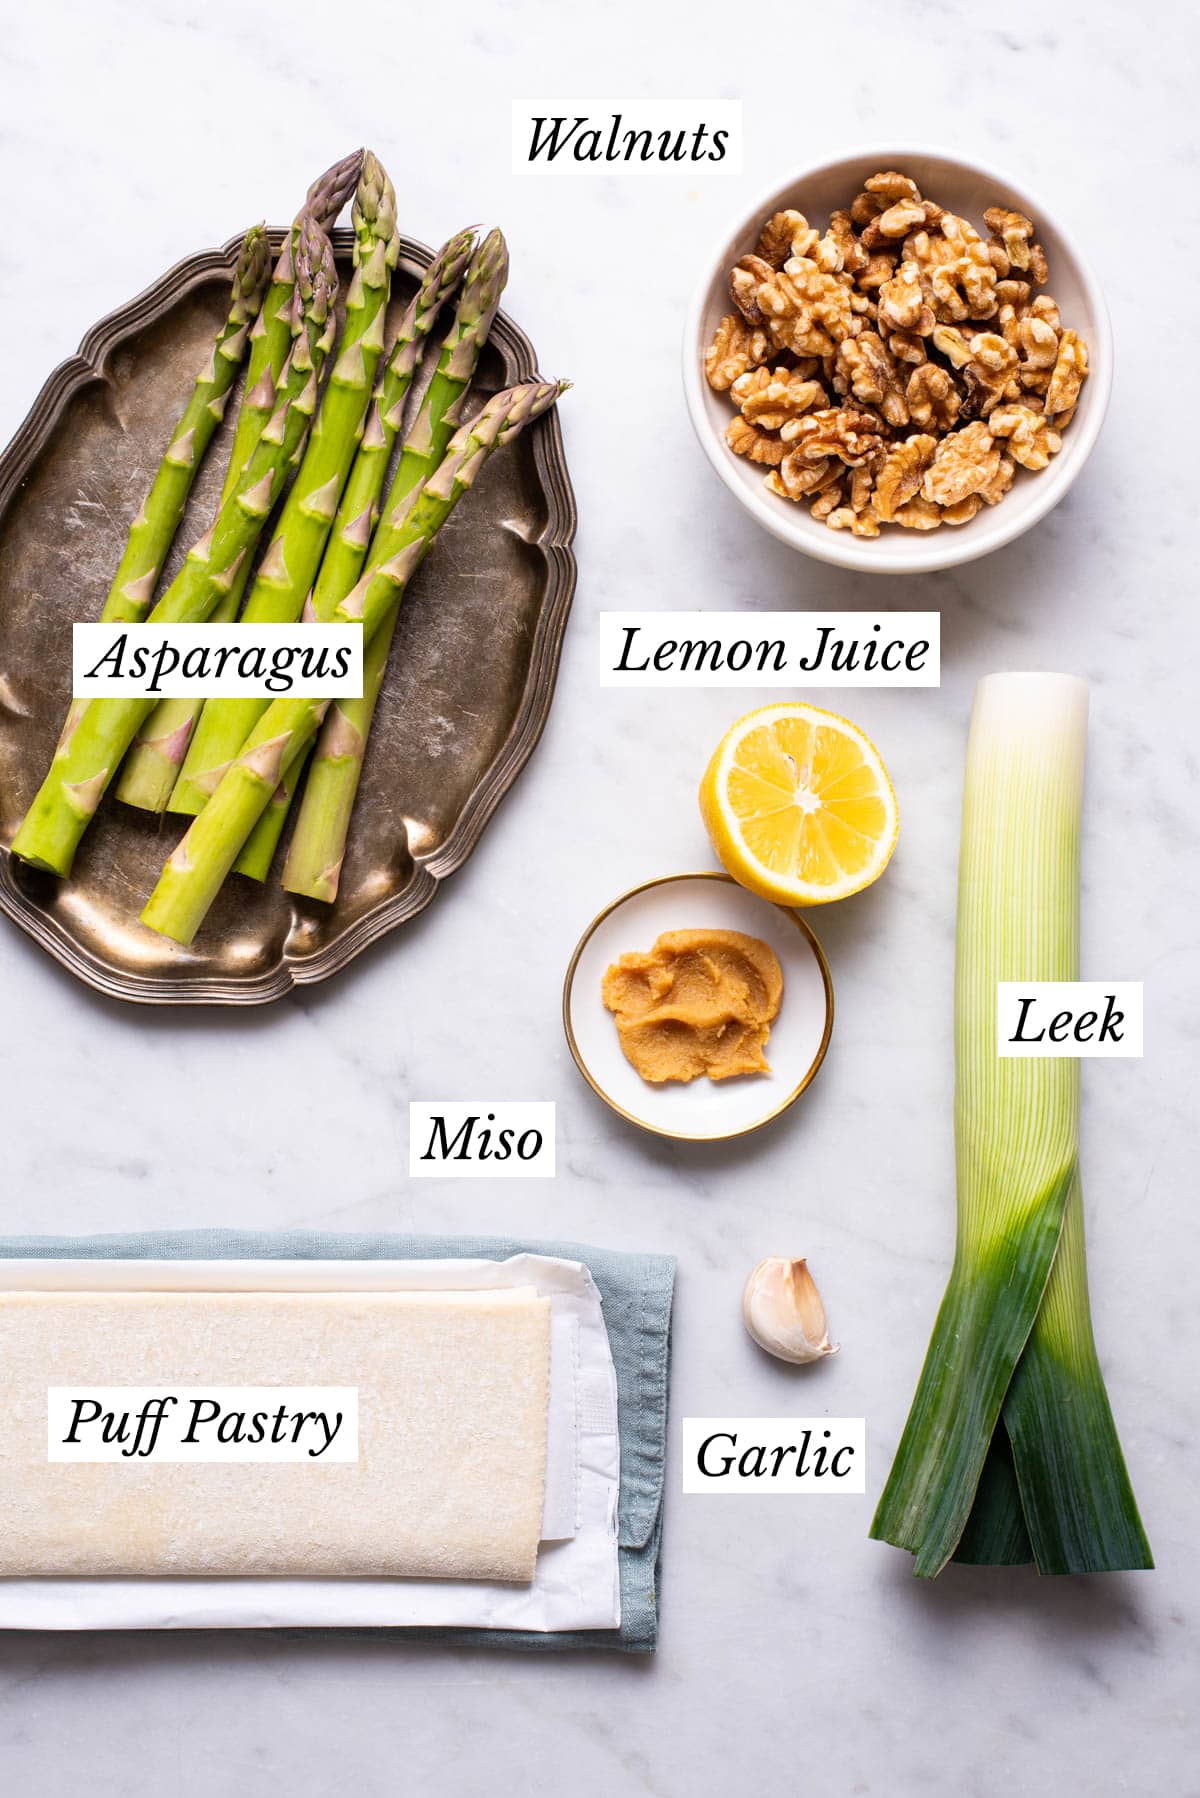 Ingredients gathered to make a vegan puff pastry tart with asparagus and leek.